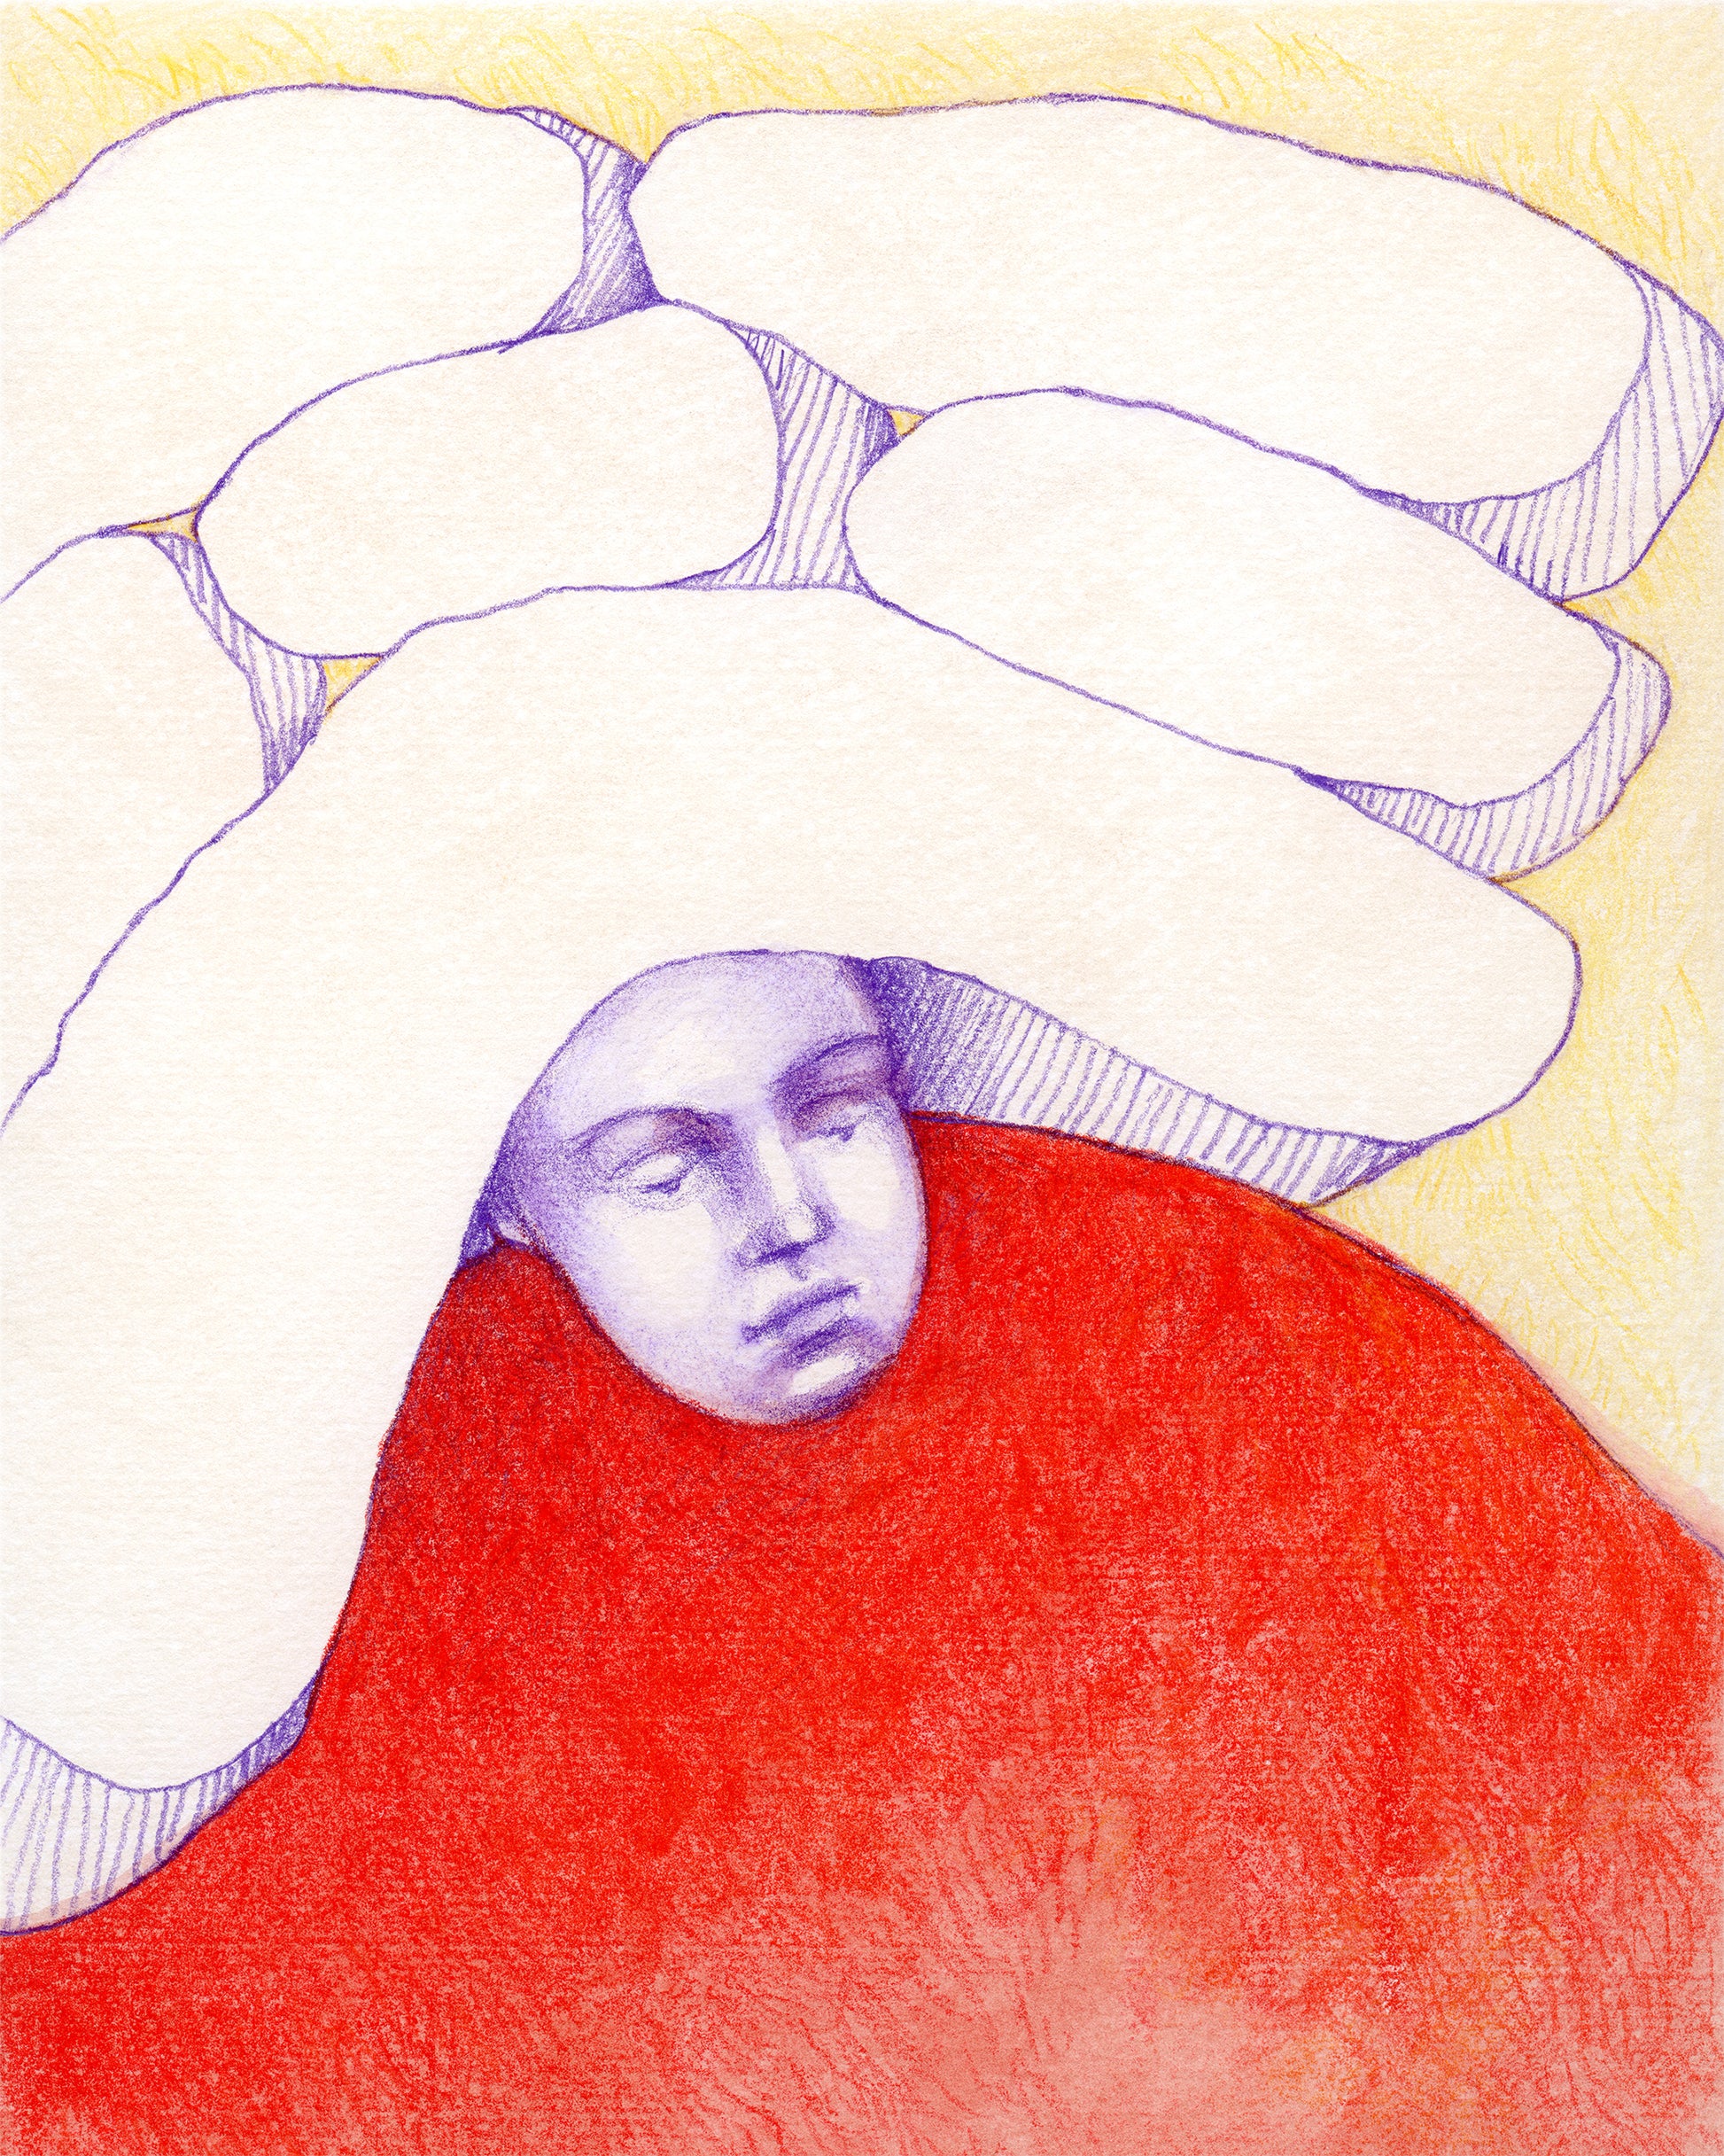 Surreal colored pencil drawing of a figure with pillow shapes on their head.